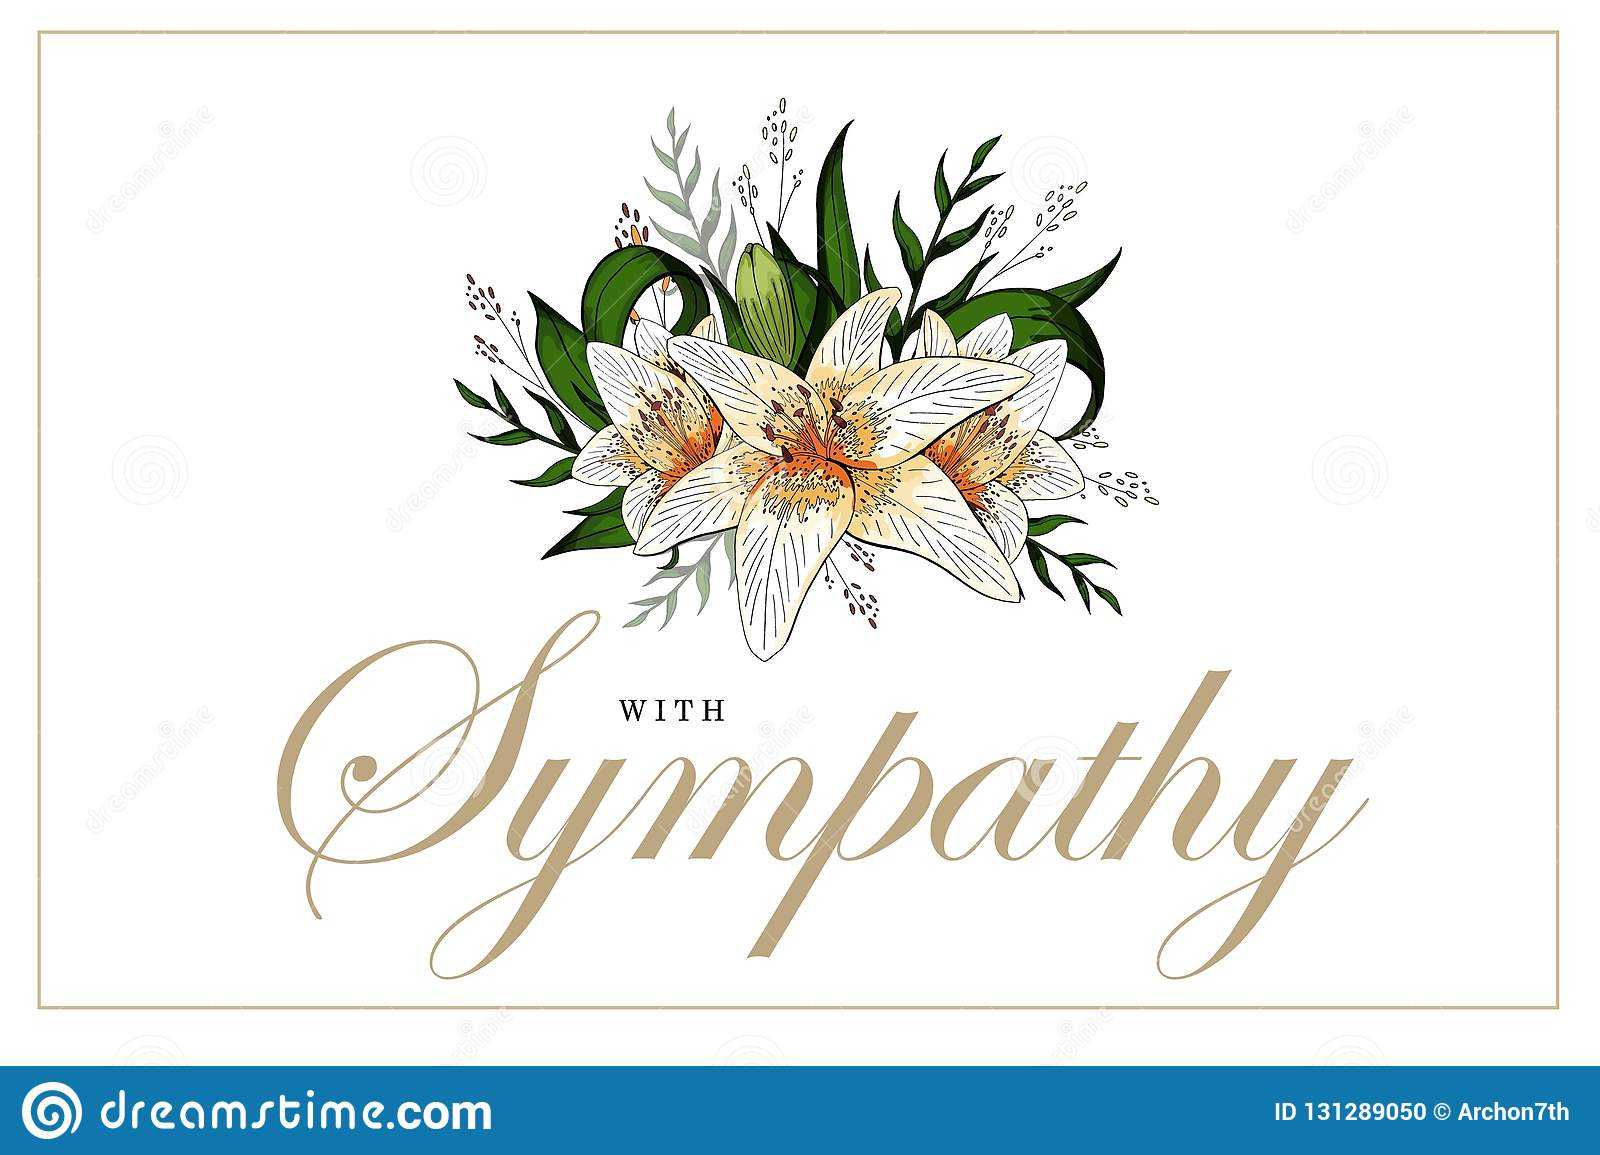 Condolences Sympathy Card Floral Lily Bouquet And Lettering With Regard To Sorry For Your Loss Card Template